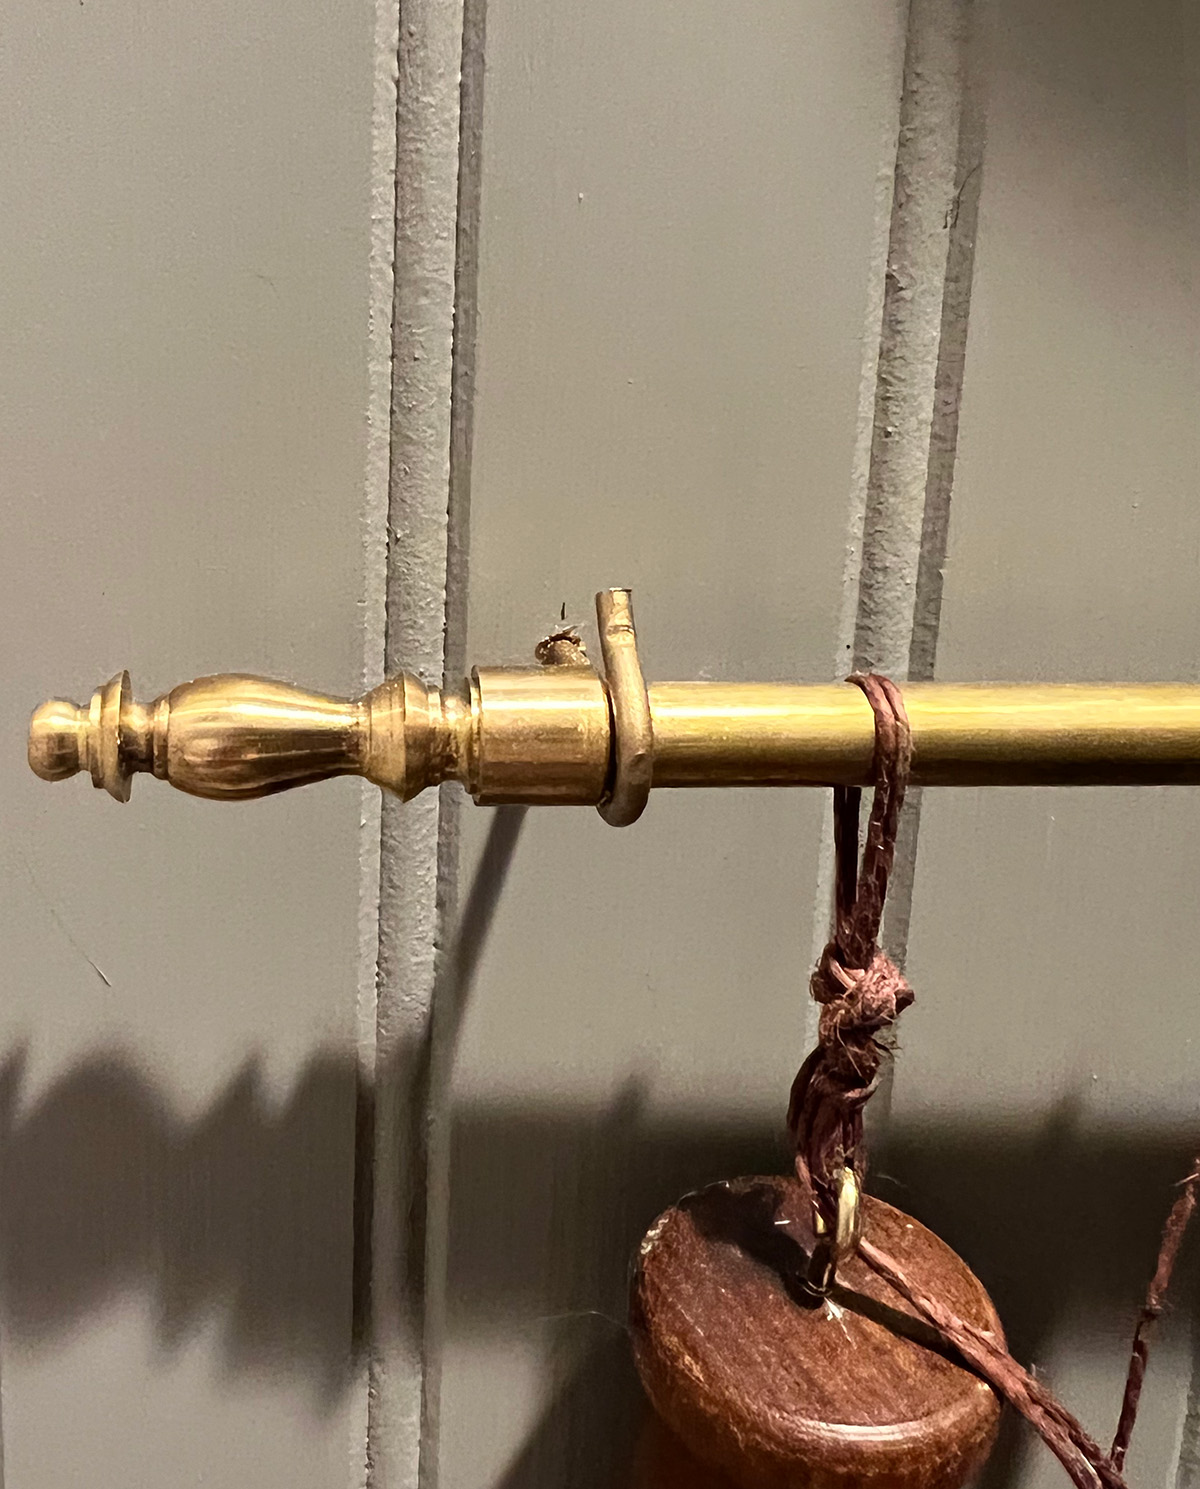 How to Use Rub-n-Buff to Make a Brass Lamp Look like Expensive Bronze